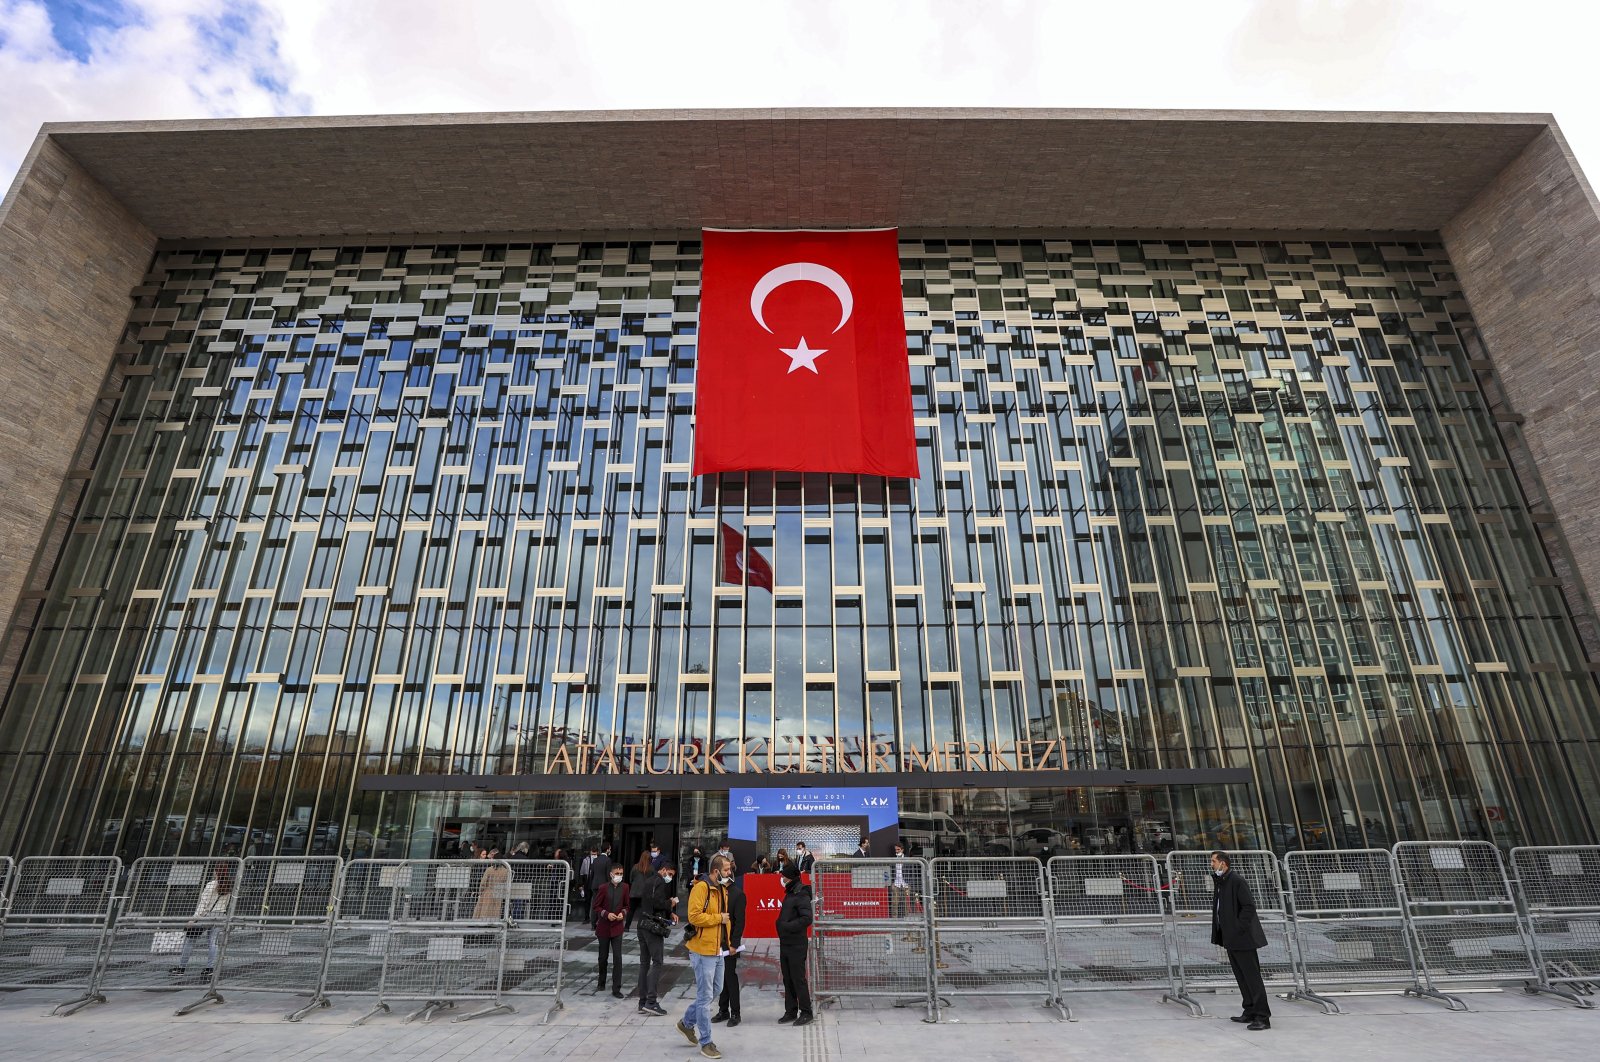 A general view of the entrance of the Atatürk Cultural Center (AKM), Istanbul, Turkey, Nov. 2, 2021. (AA Photo)